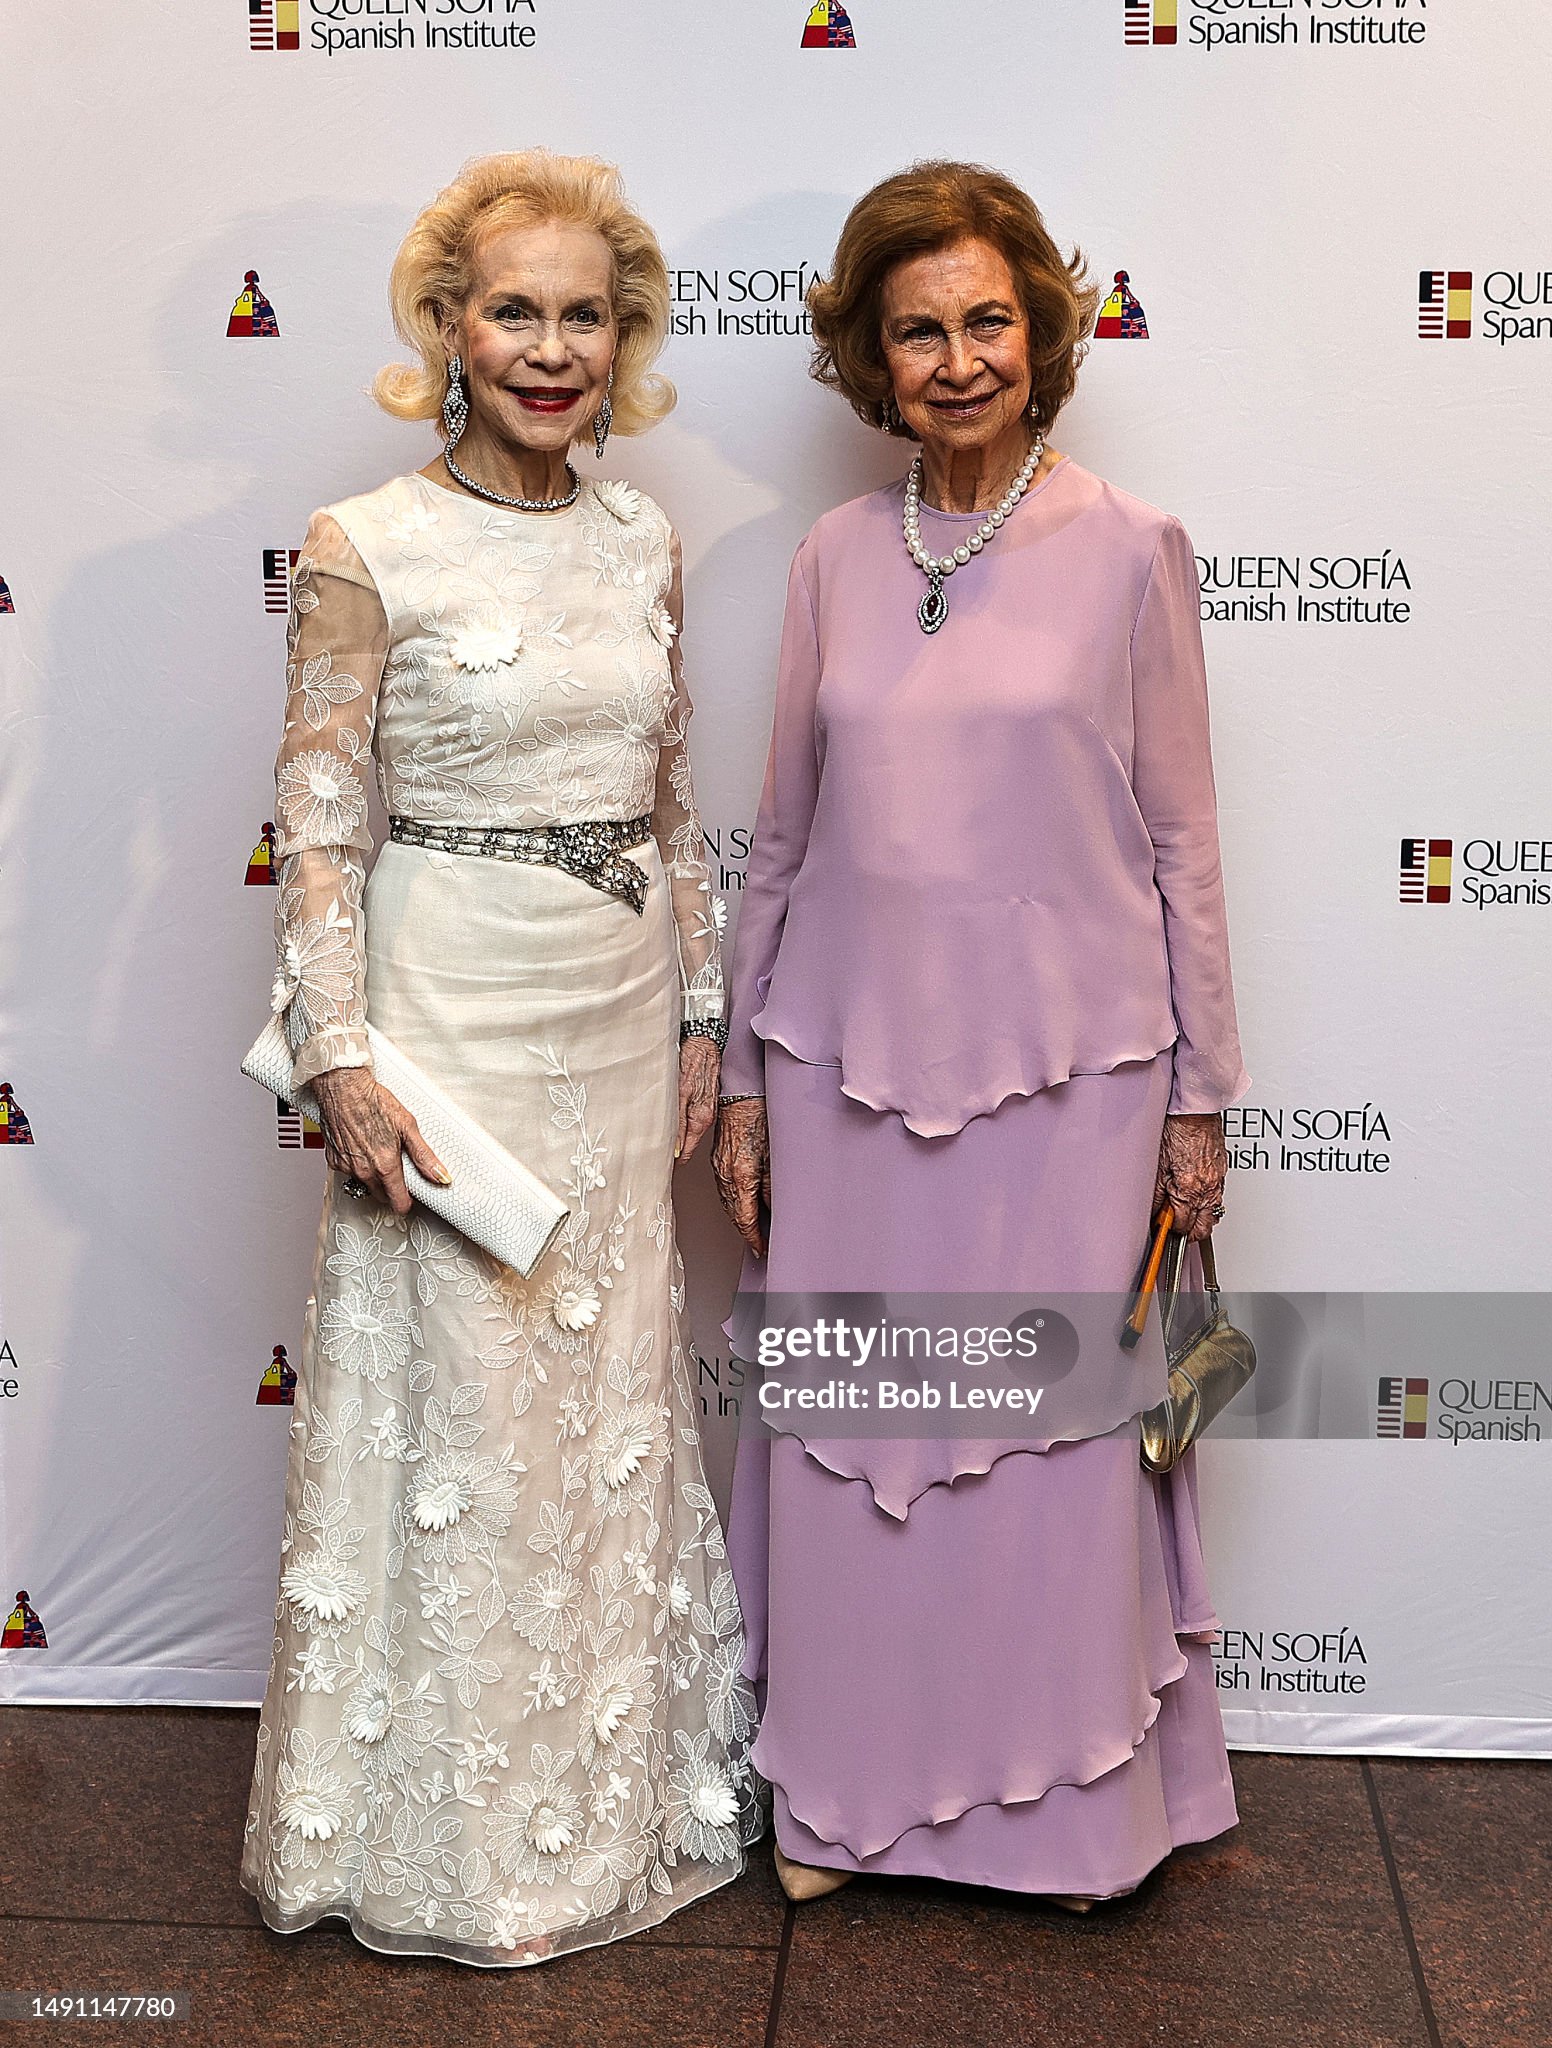 houston-socialite-and-philanthropist-lynn-wyatt-and-queen-sofia-of-spain-at-the-museum-of-fine.jpg